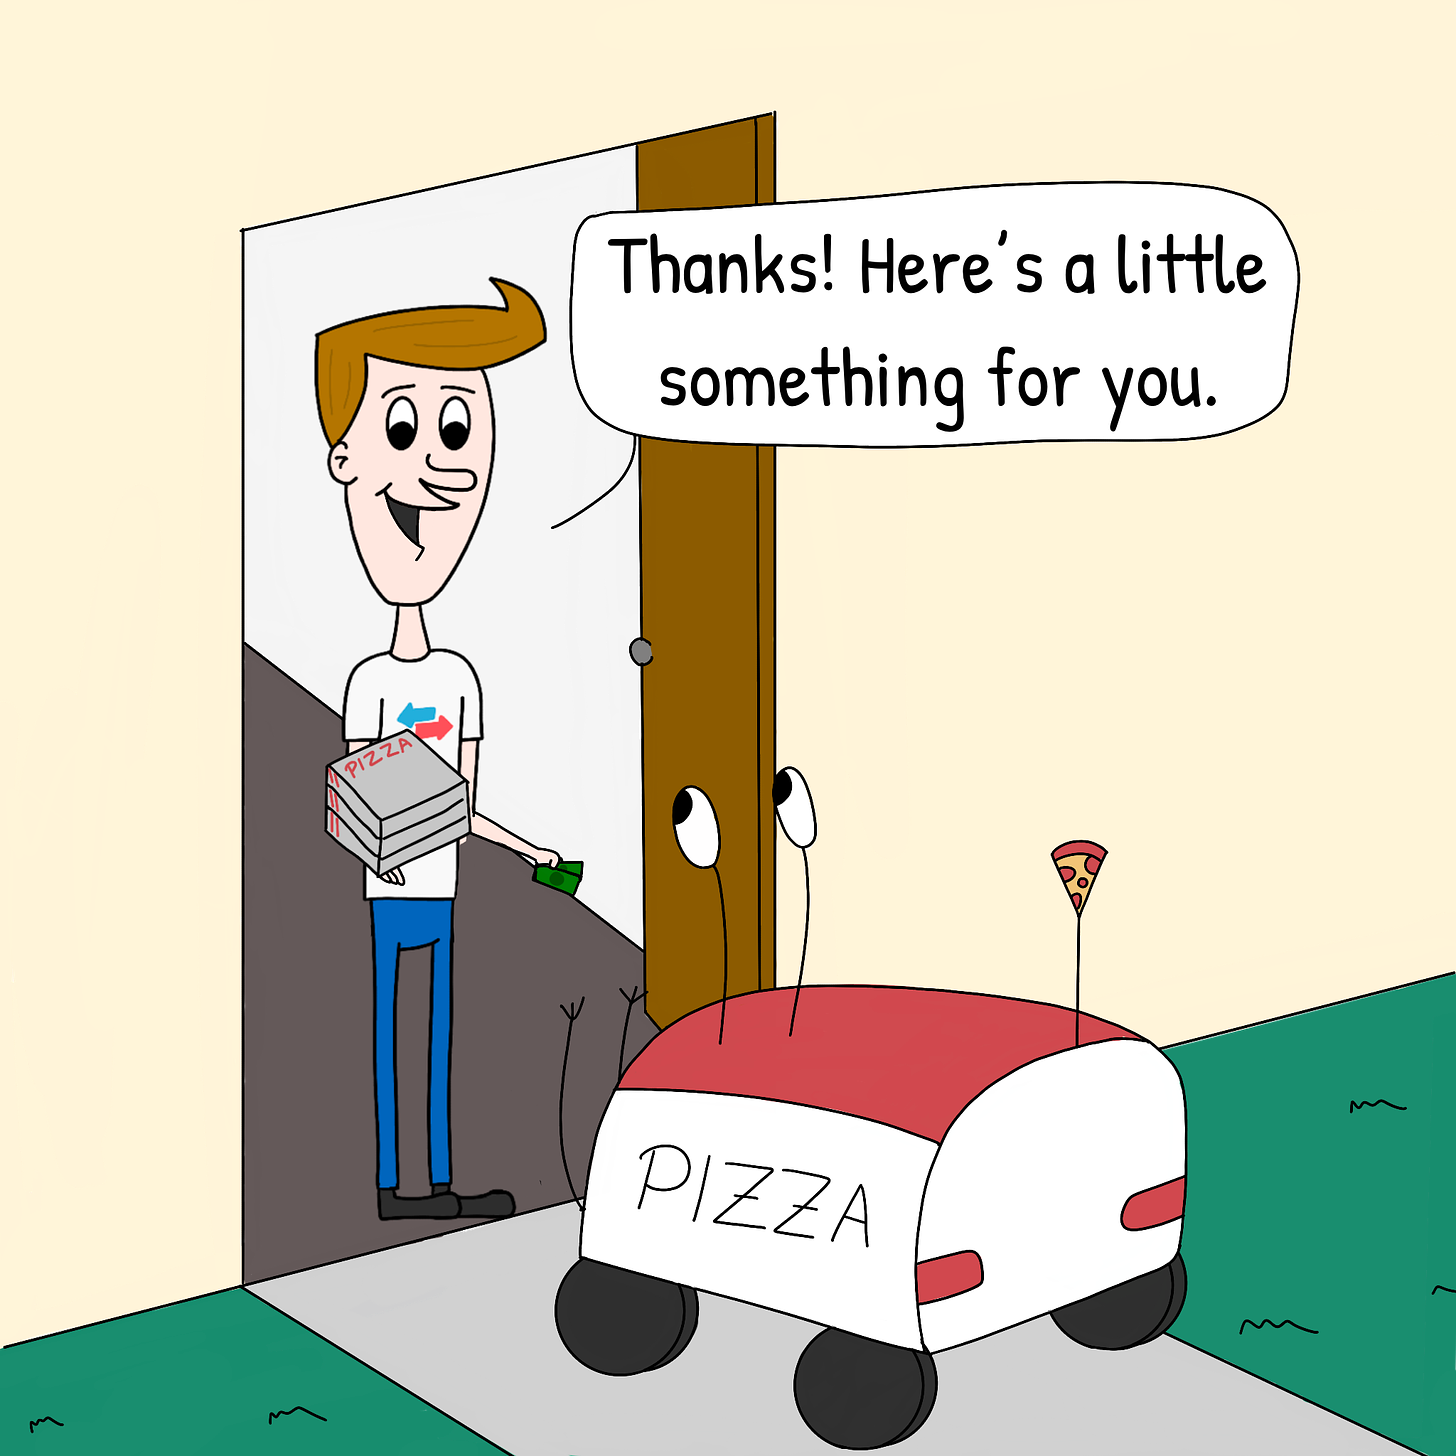 Panel 2: Vic takes the pizzas from the robot and gives him two $1 bills. "Thanks! Here's a little something for you.", he says.